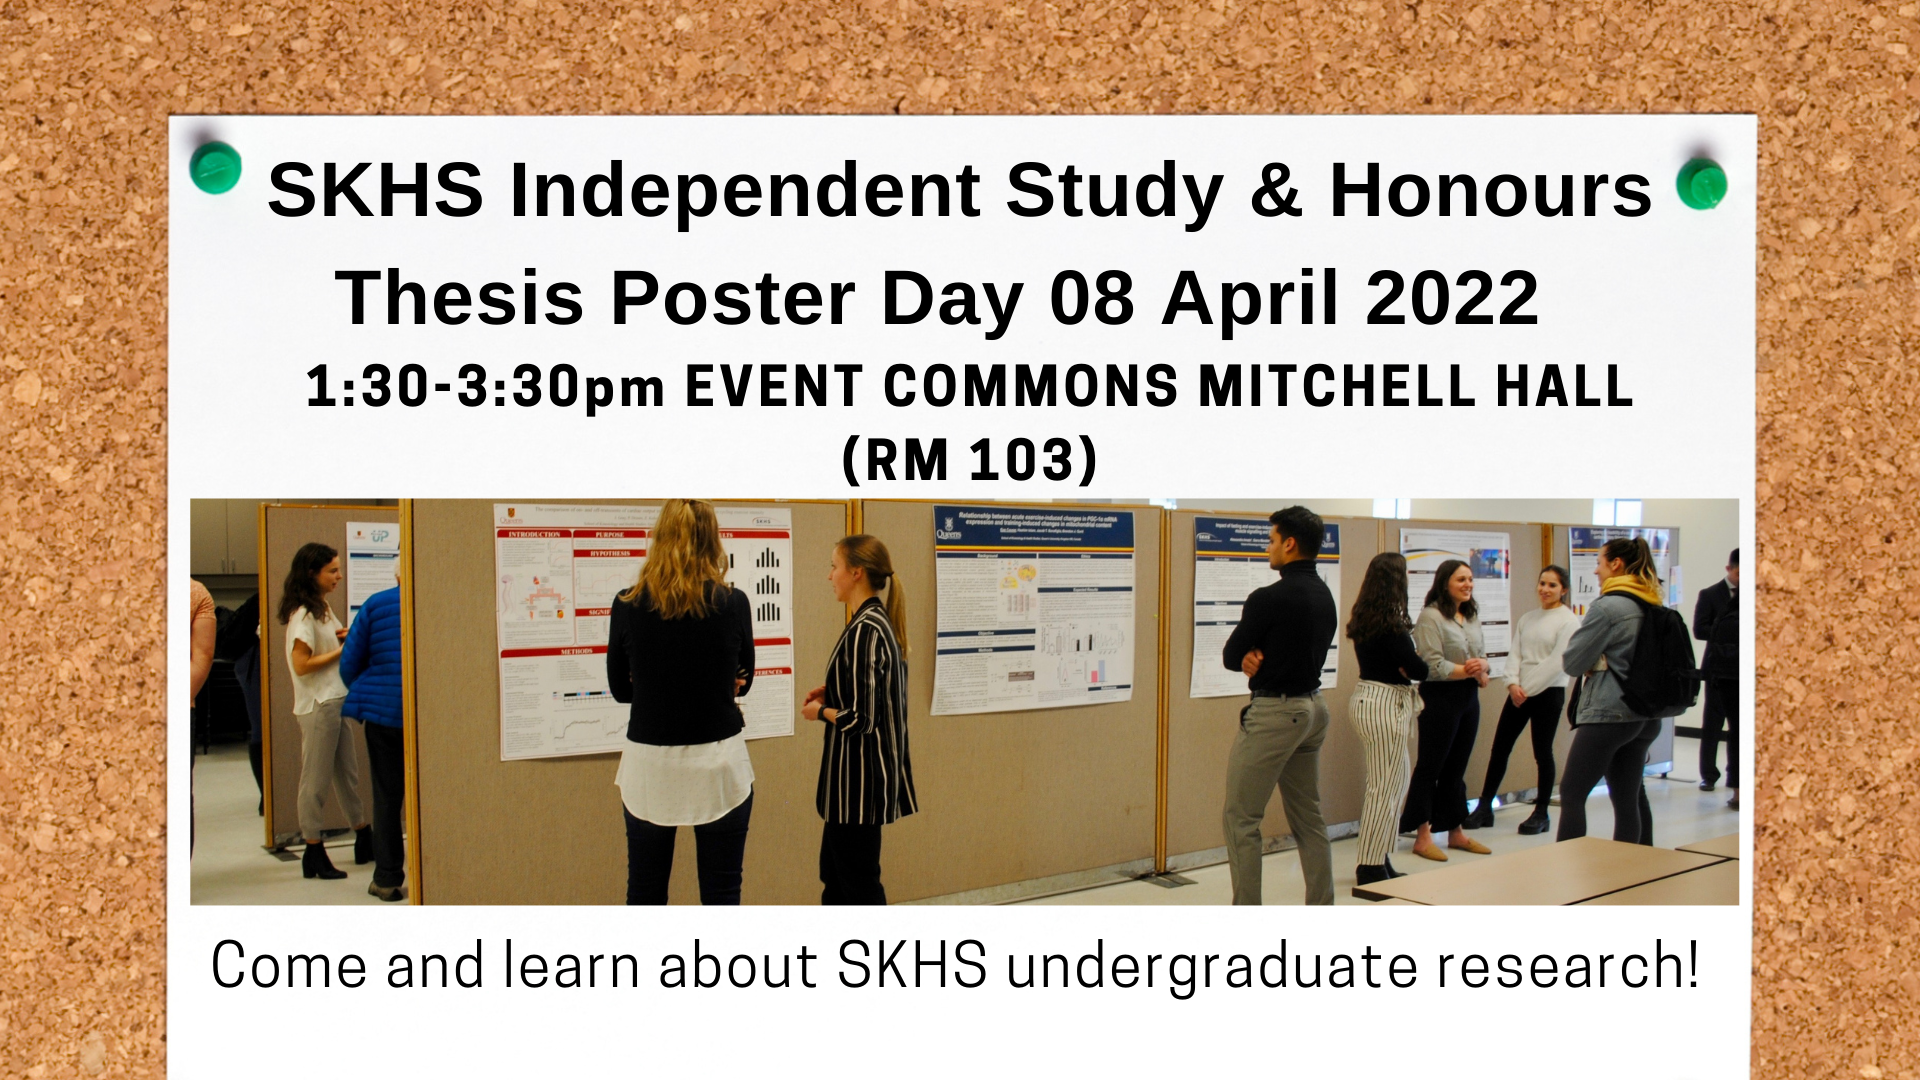 Infographic for SKHS Independent Study & Honours Thesis Poster day